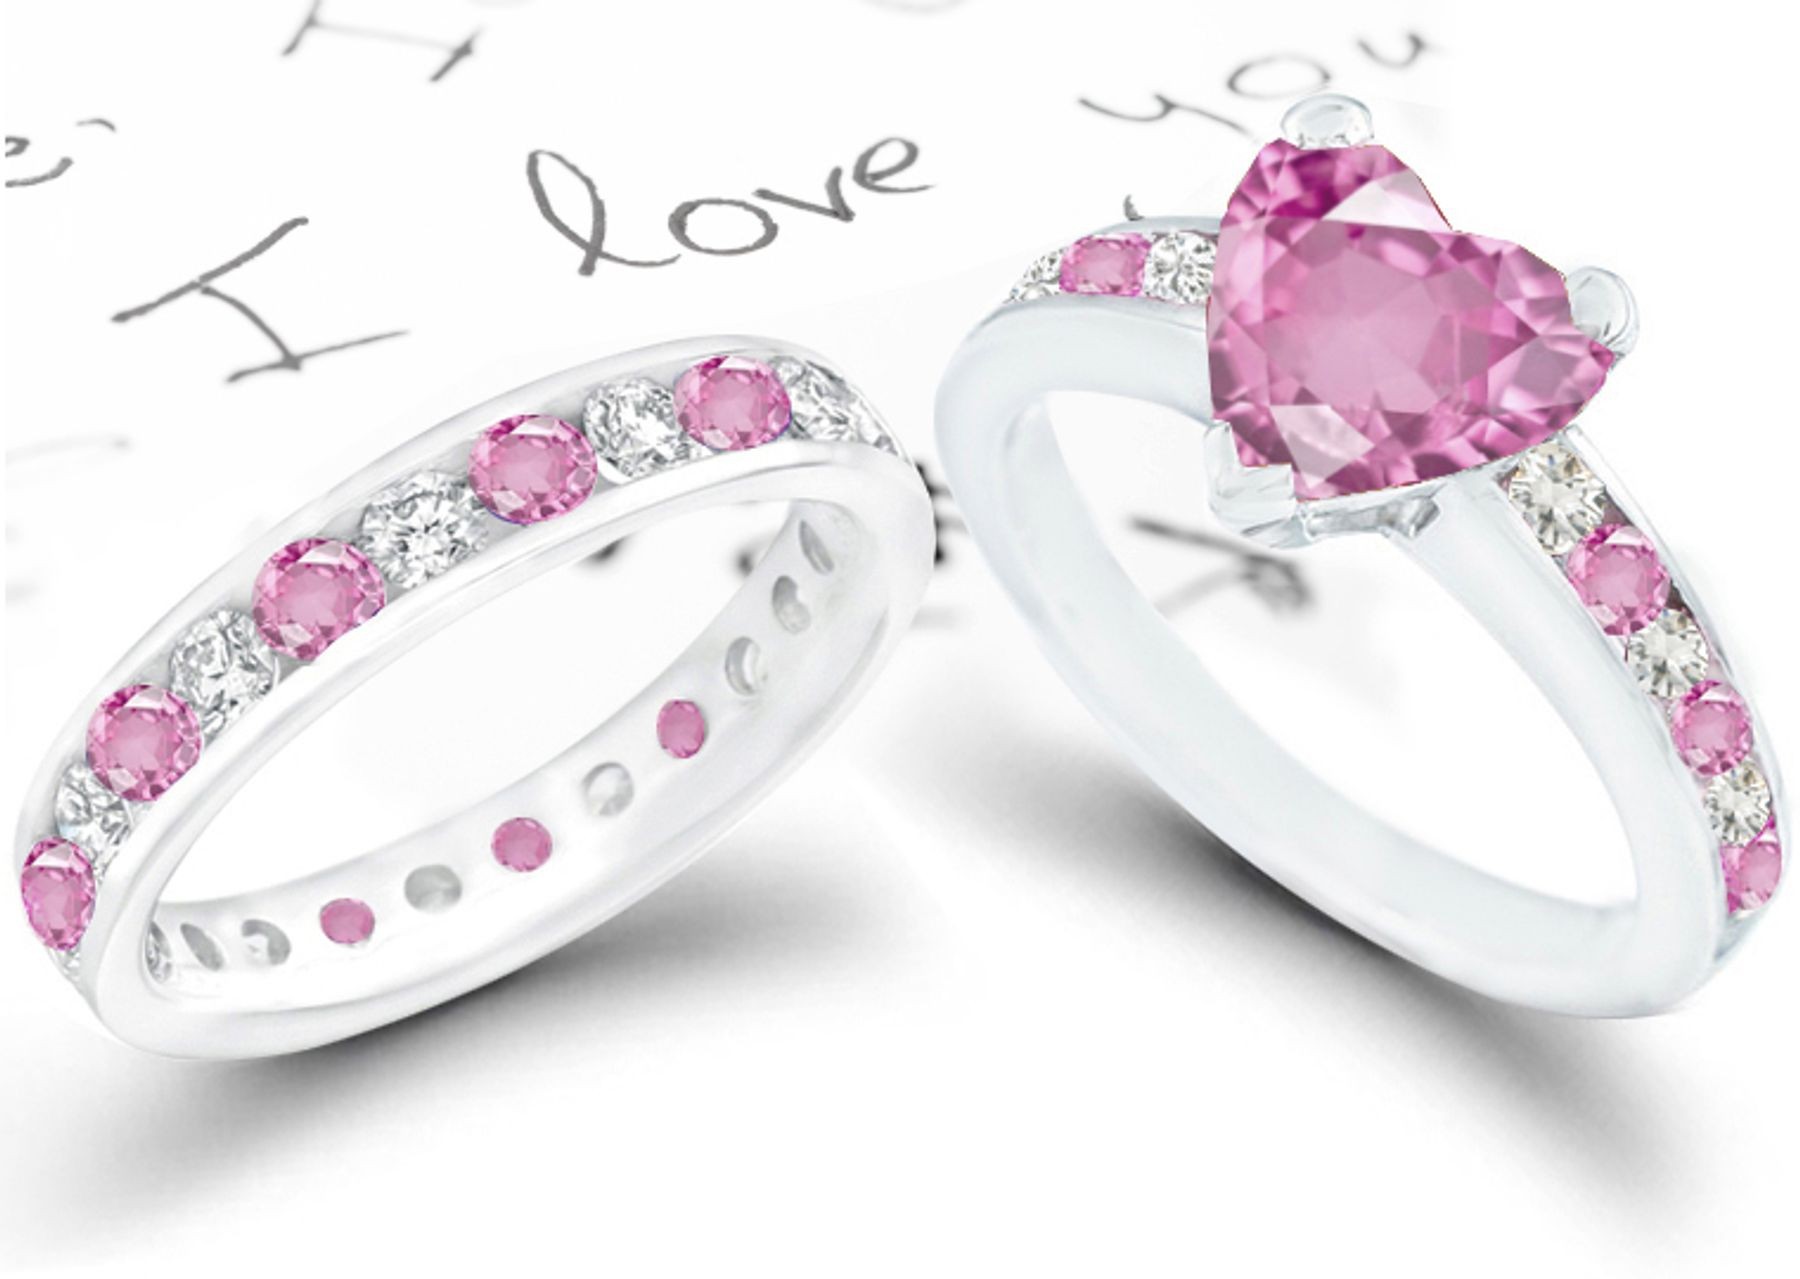 2013 Catalog No. 5 - Product Details: Heart Pink Sapphire &Diamond Engagement Ring & Wedding Ring